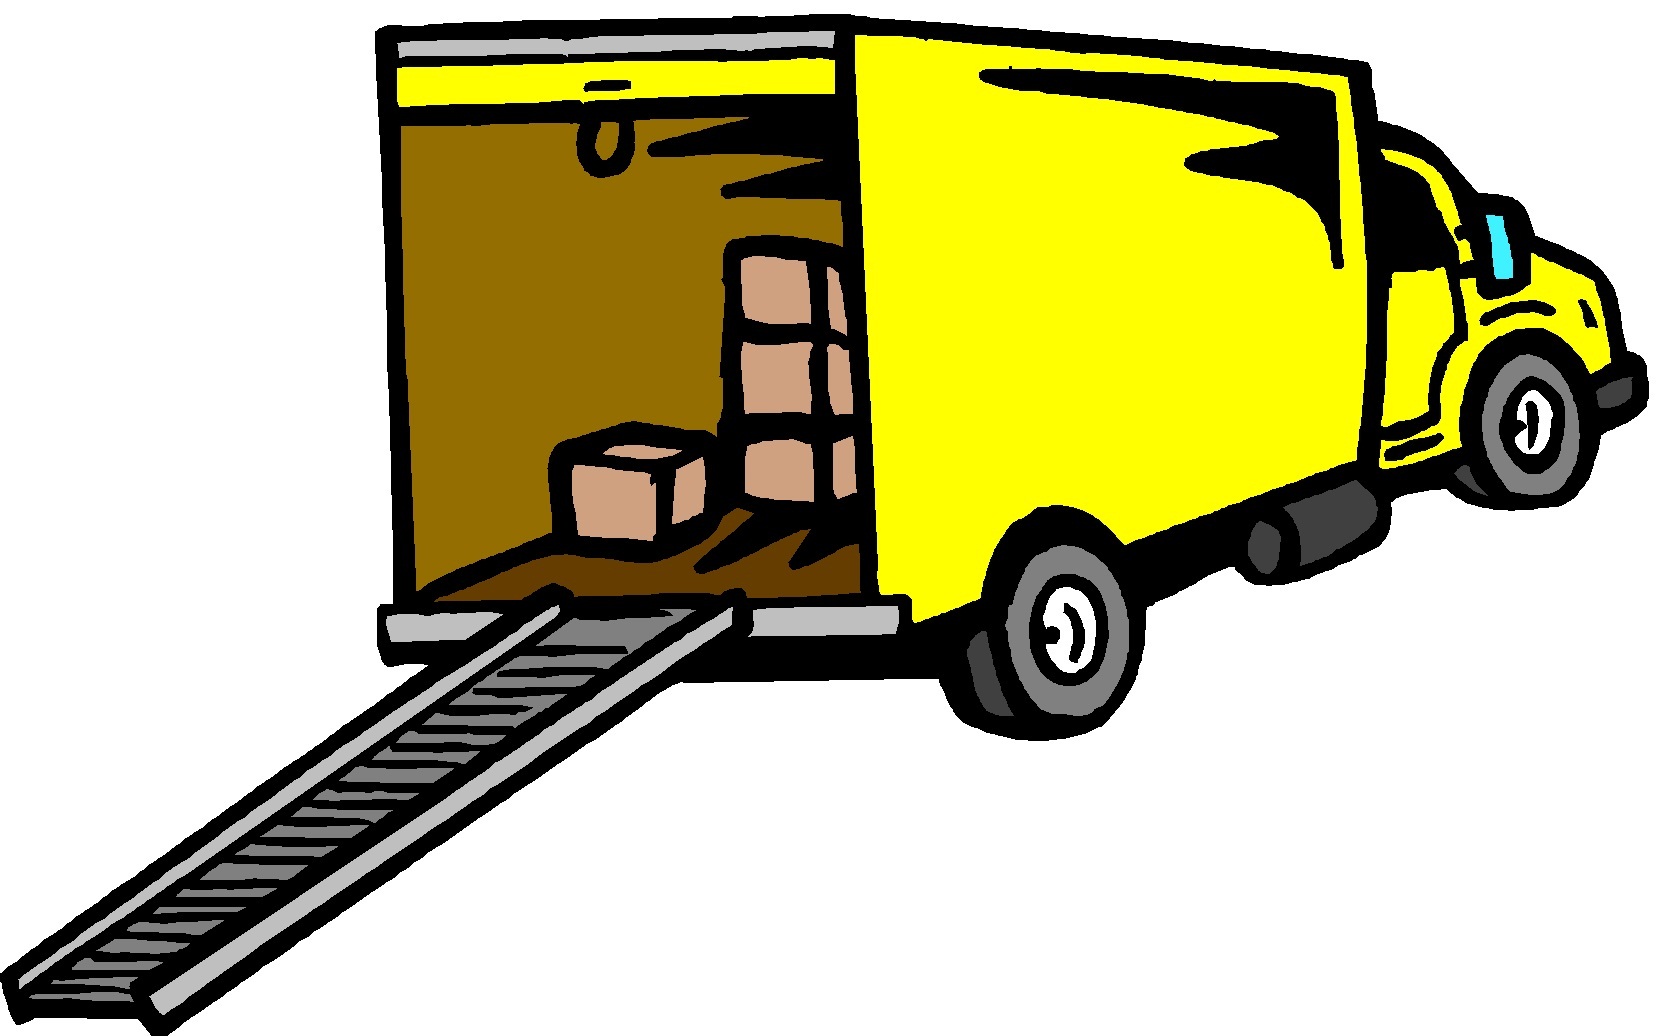 Clip Arts Related To : moving truck. view all Moving Company Cliparts). 